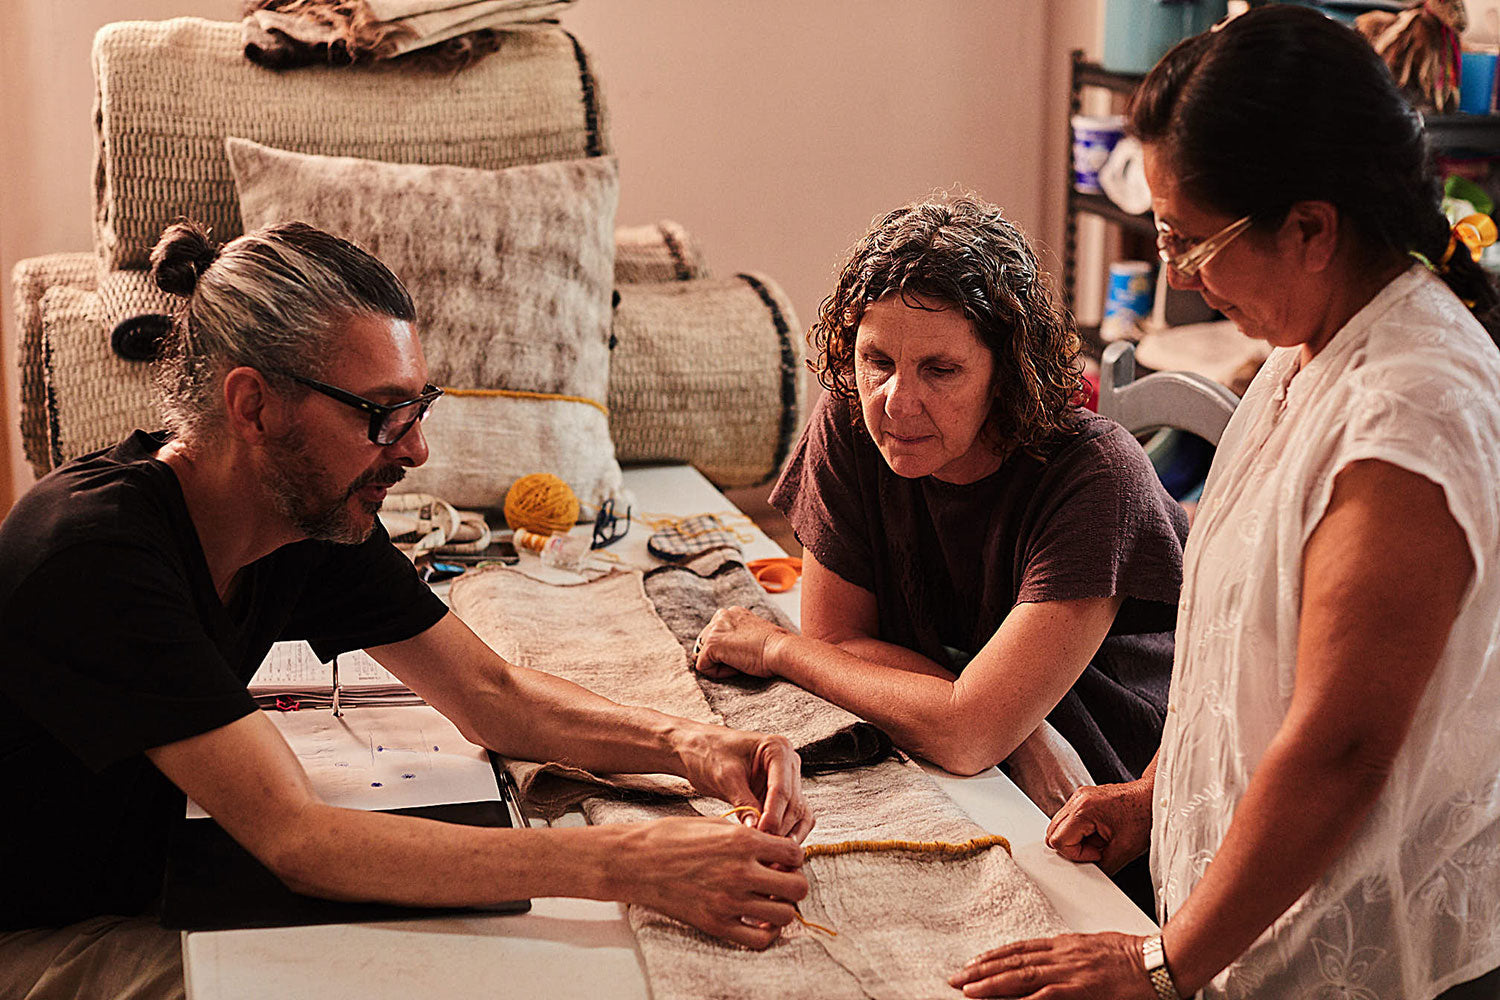  In the studio — a melding of natural fibres, tradition and culture